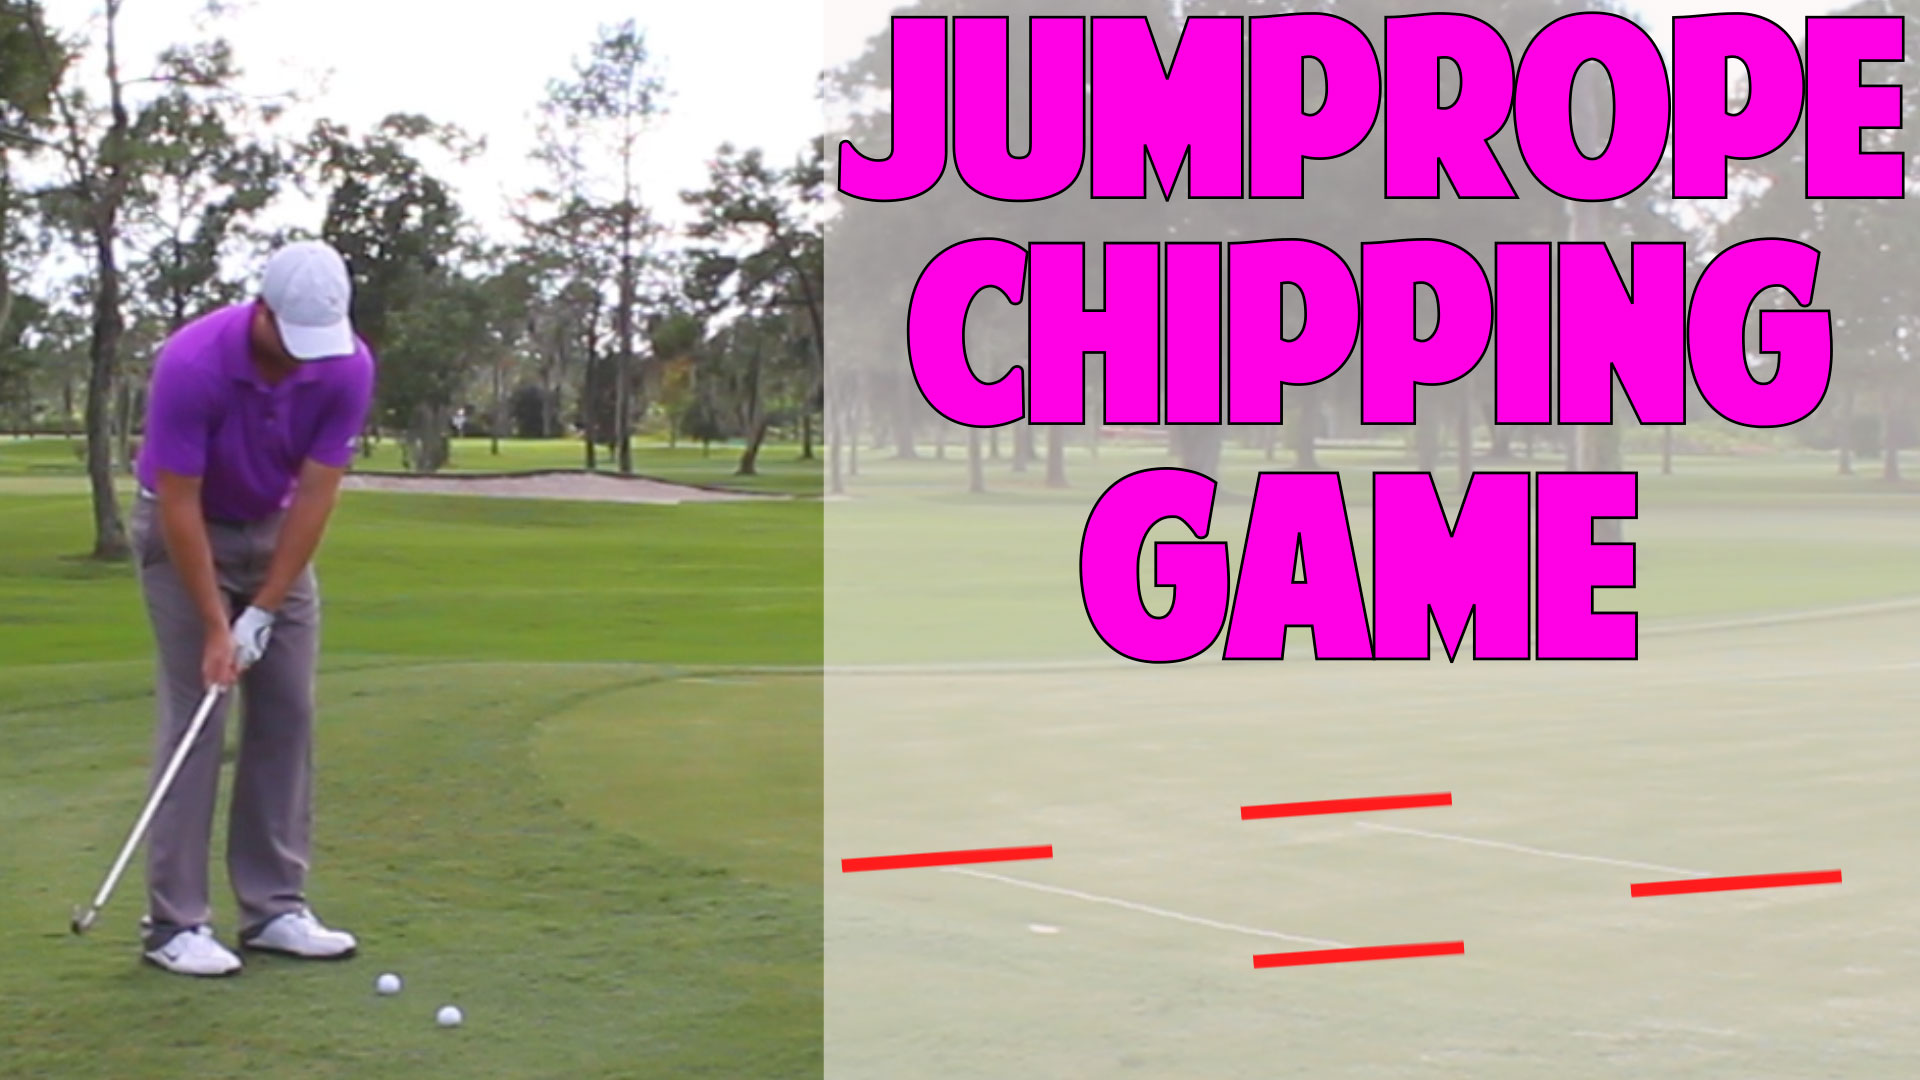 chipping game golf